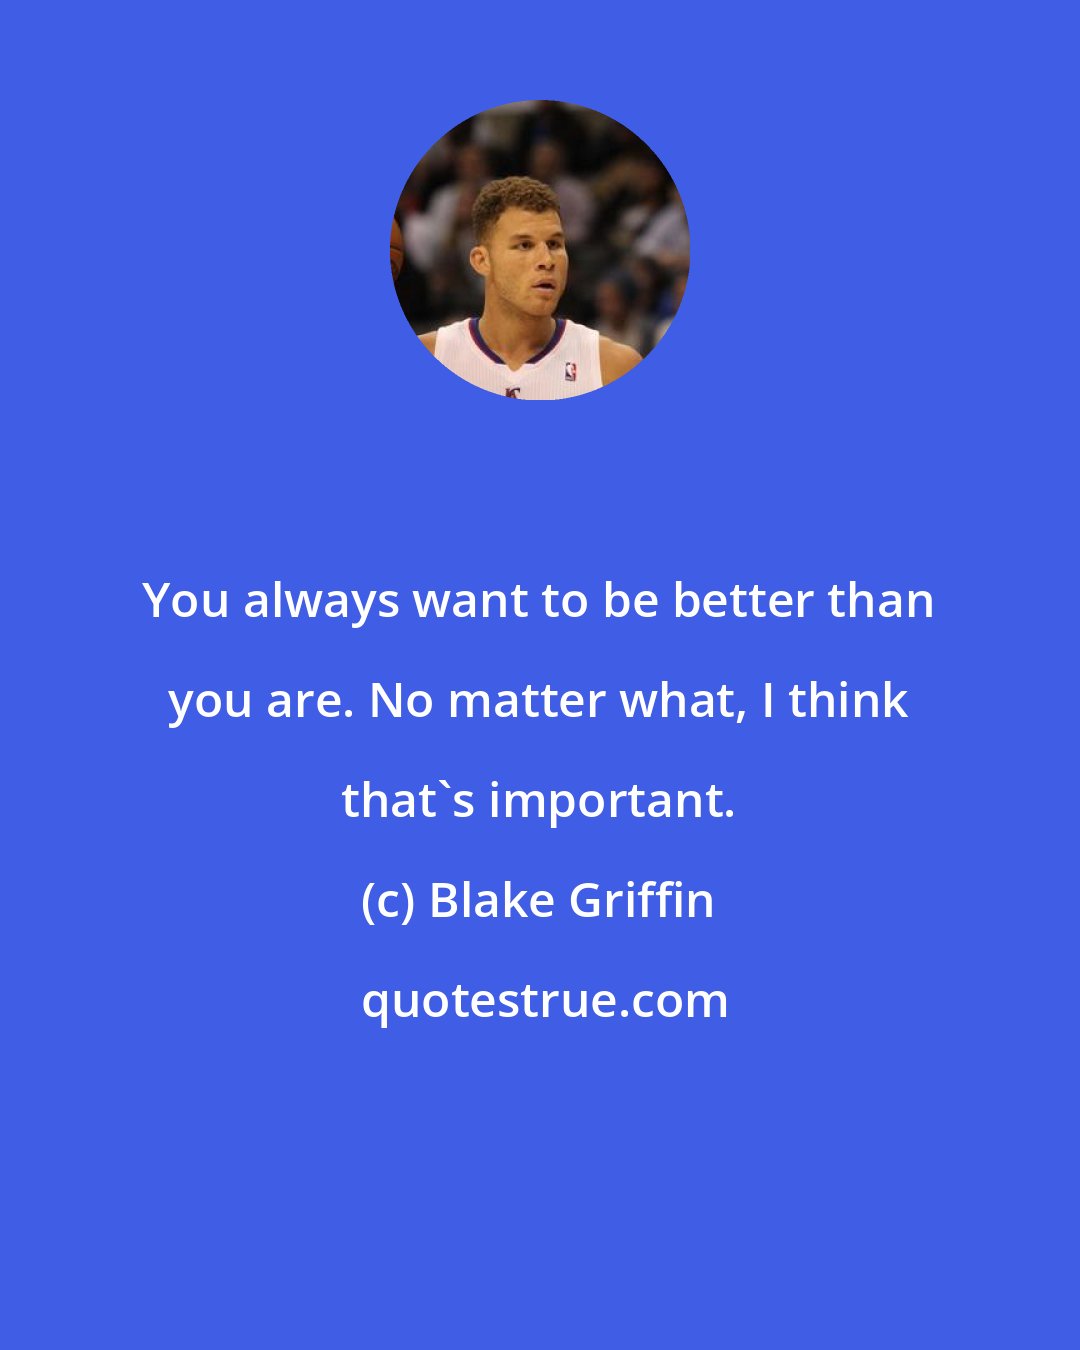 Blake Griffin: You always want to be better than you are. No matter what, I think that's important.